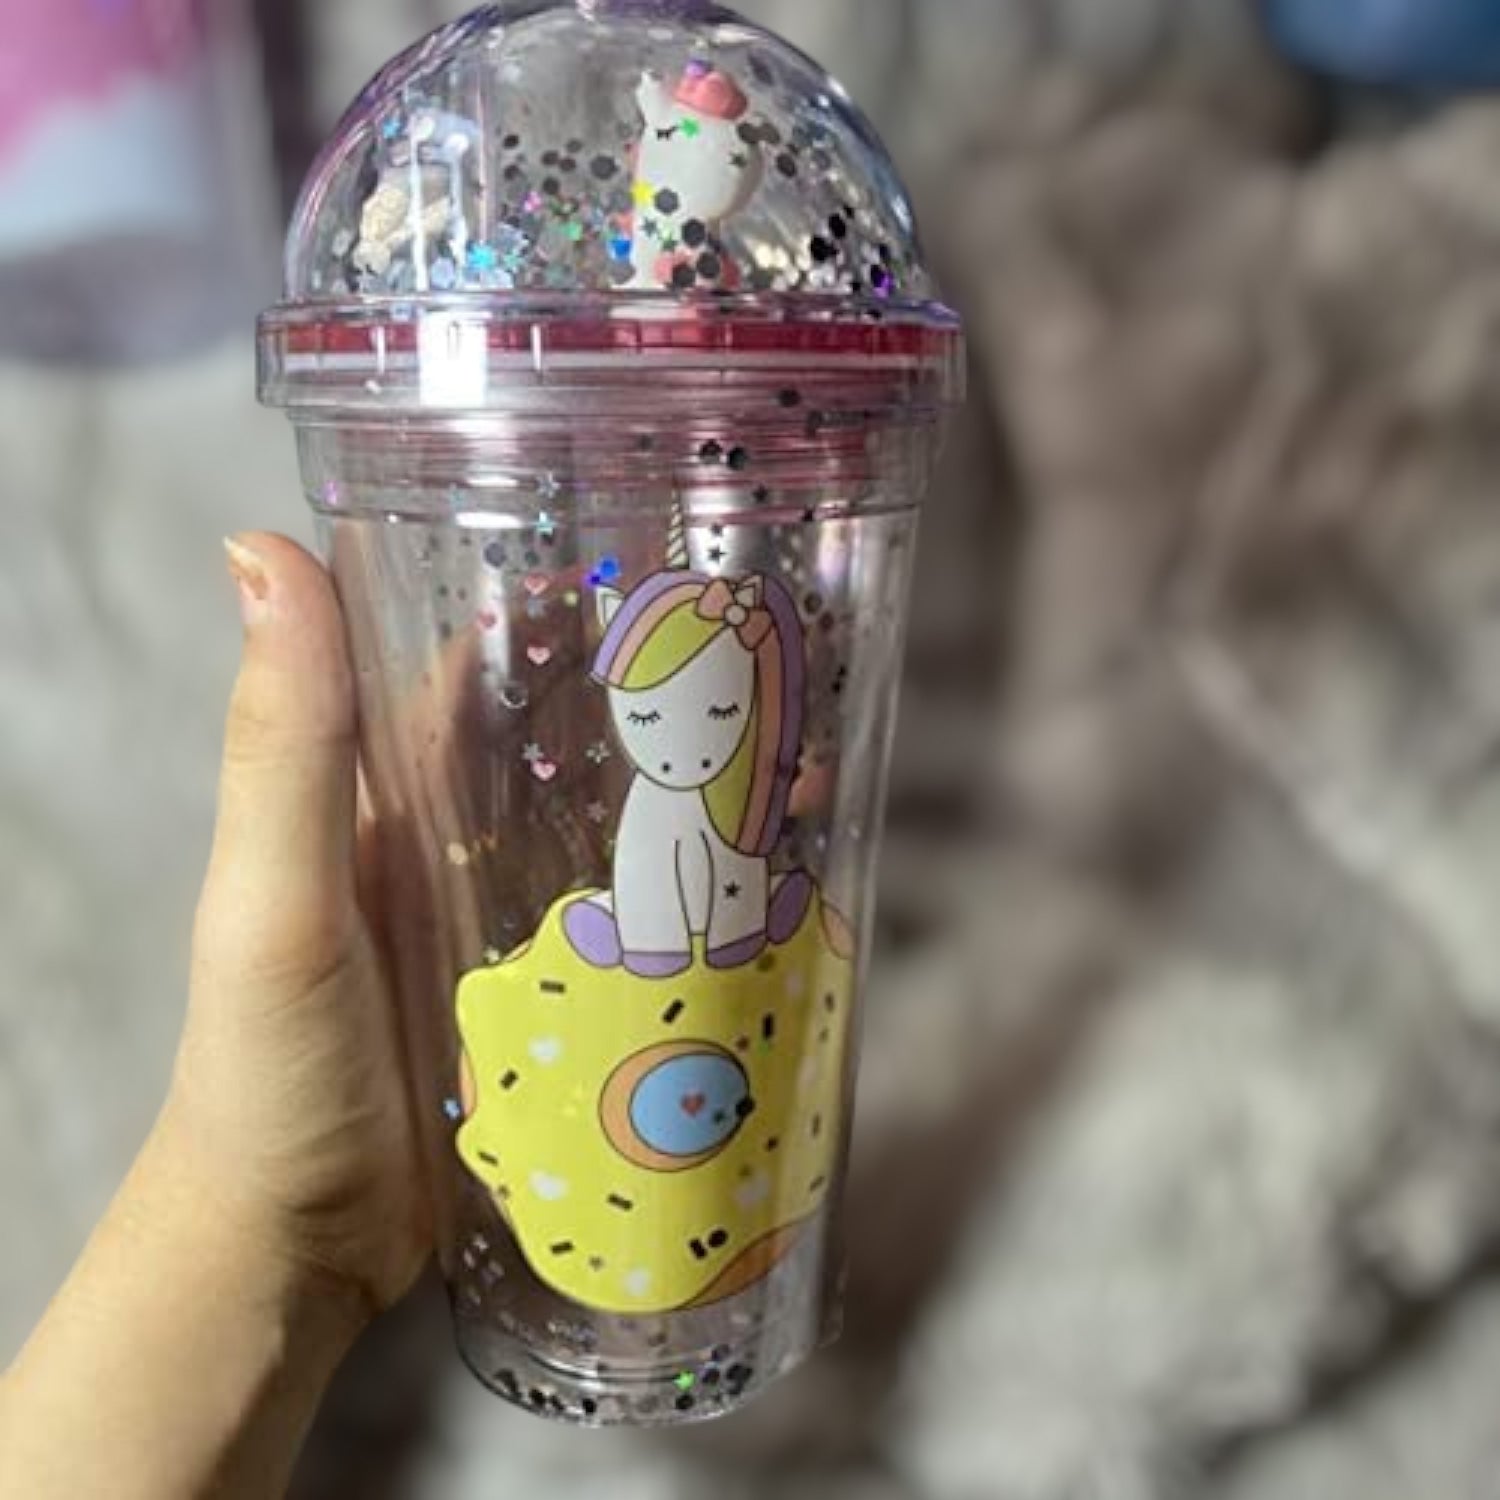 Sipper Bottler with Straw - Unicorn Design | Kid's Cup / Tumbler with Lid | Water Bottle | Fruit Juice Mug for Kids - For Kids Birthday Gift & Return Gift Success - Apkamart #Style_pack of 1